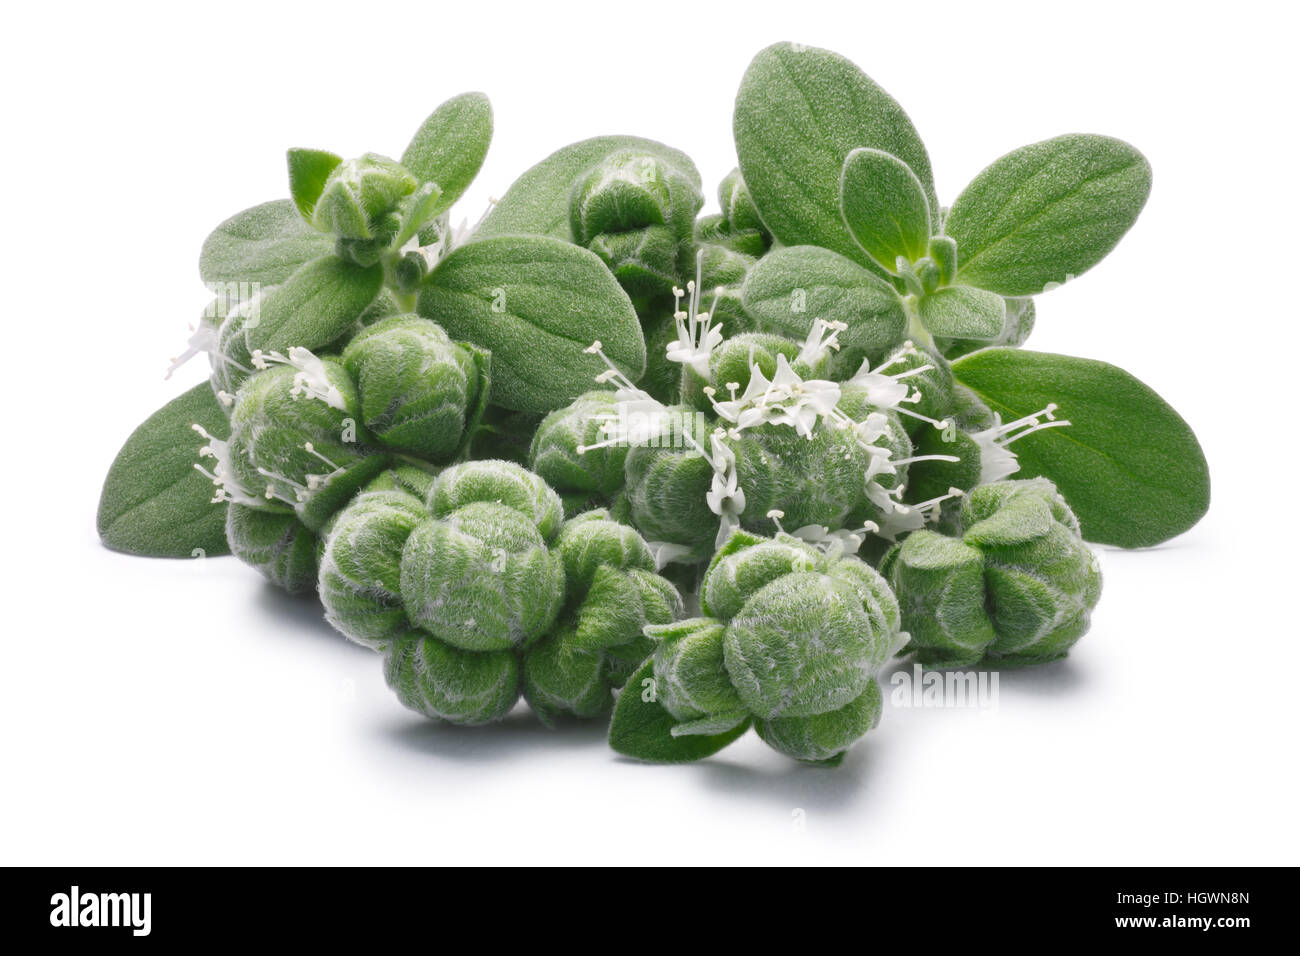 Fresh Marjoram (Origanum majorana), leaves, flowers and buds, close up. Clipping paths, shadows separated Stock Photo